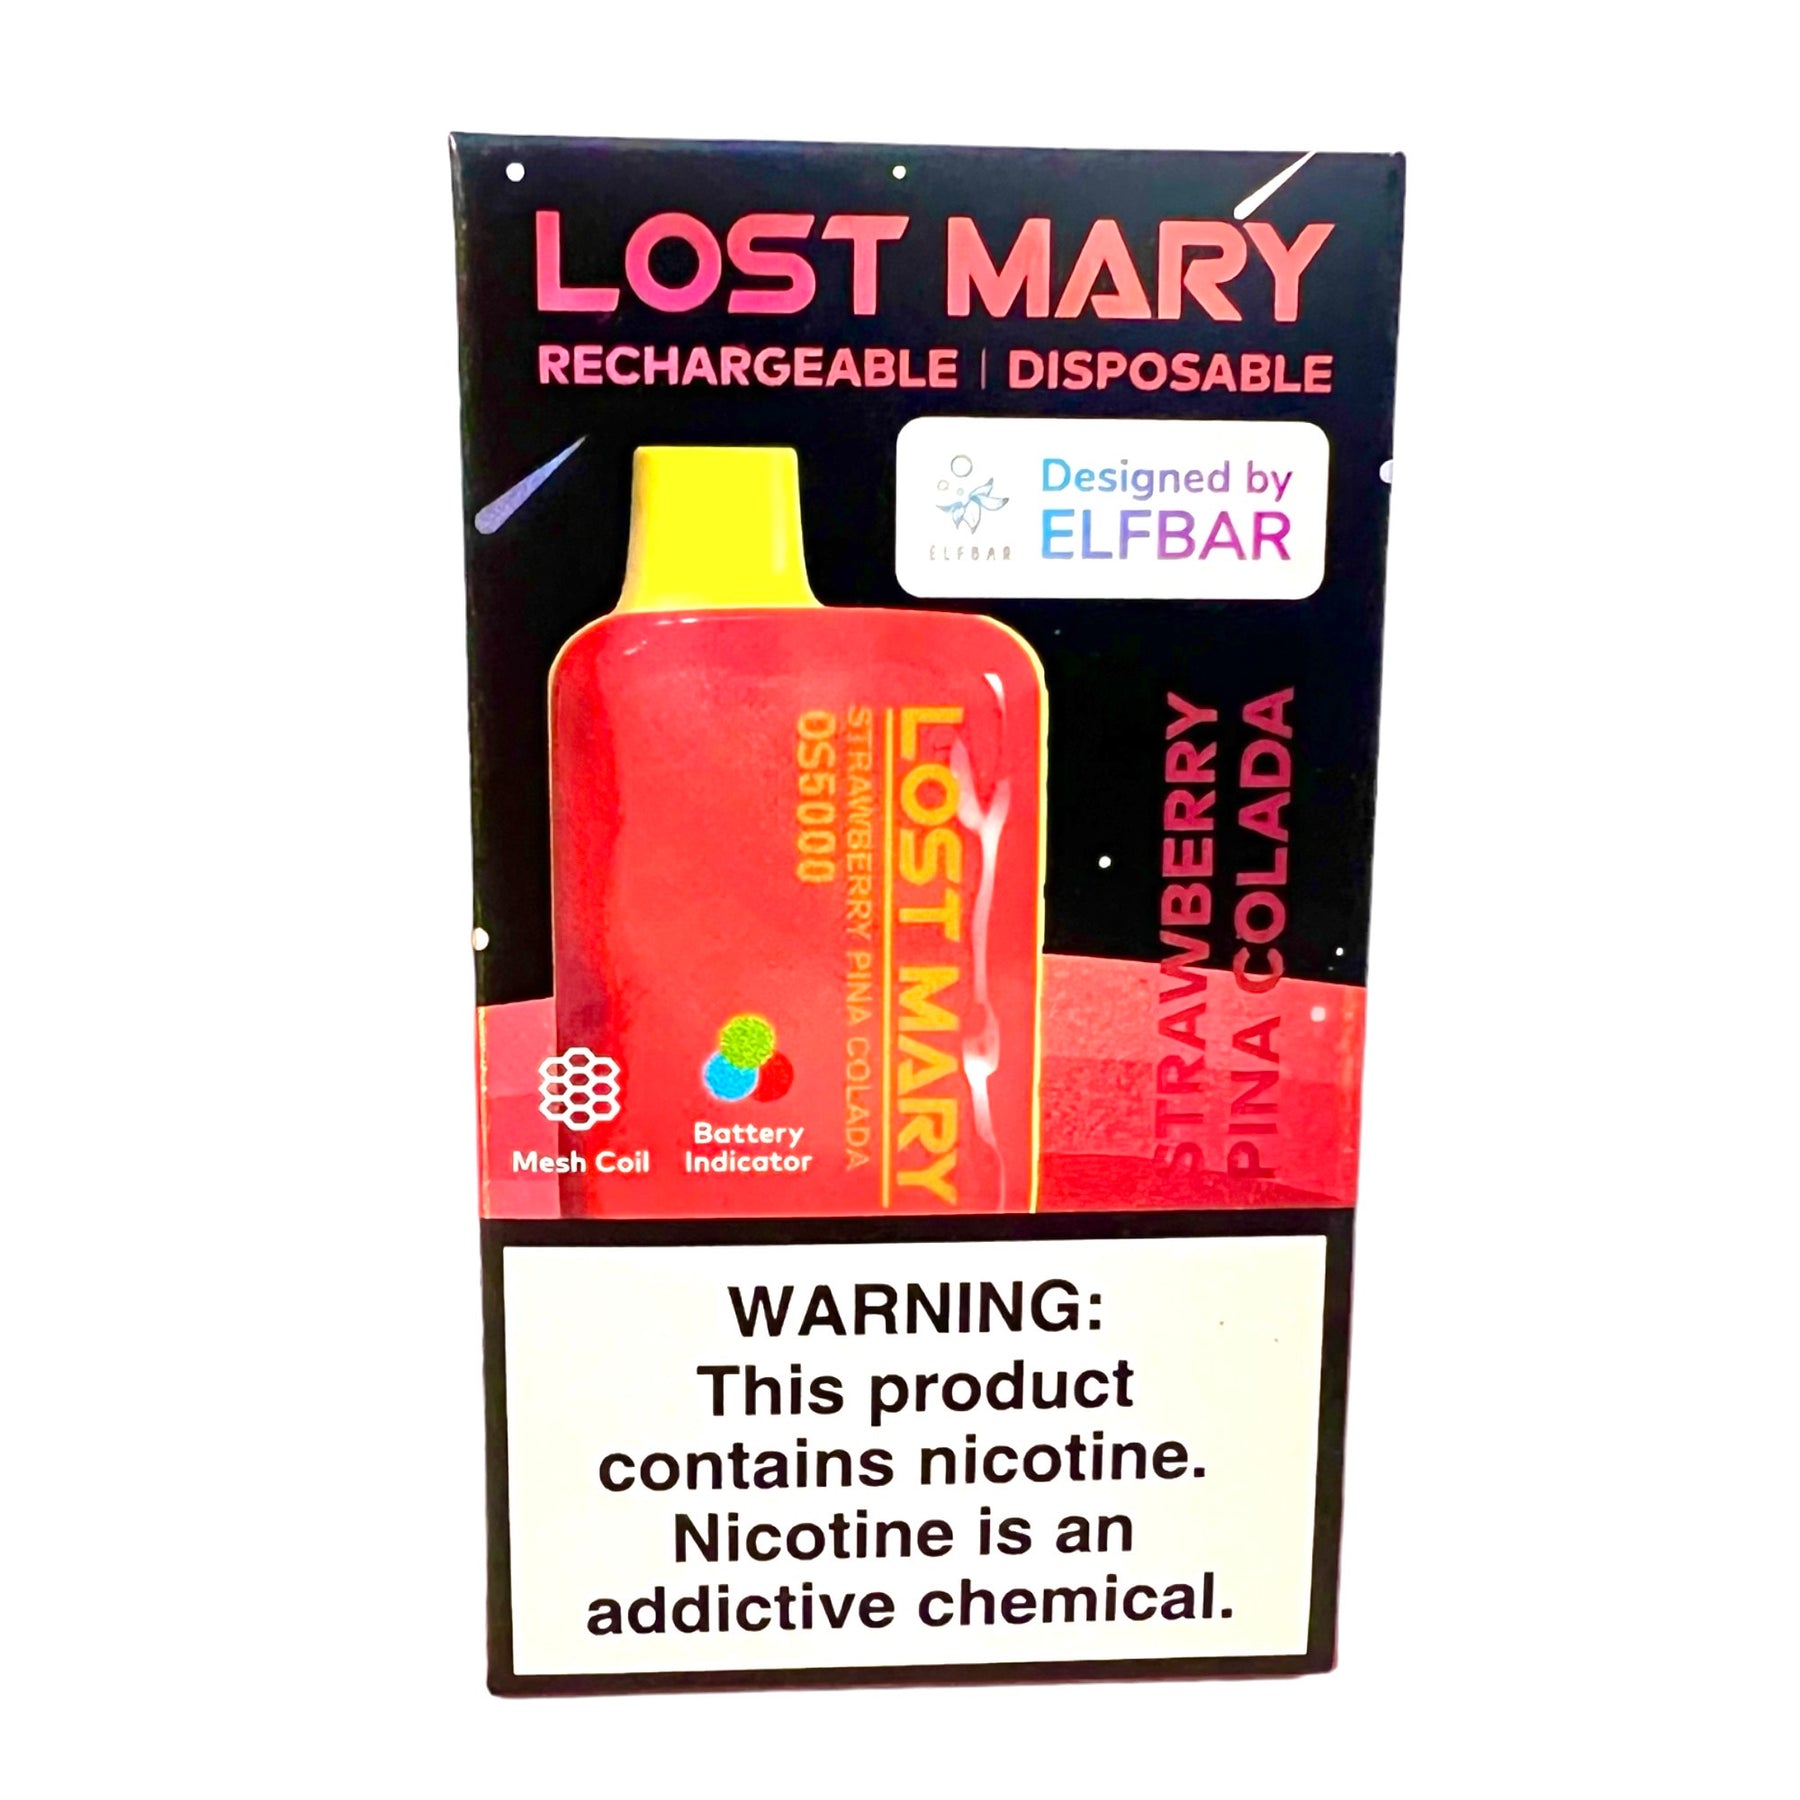 lost mary disposable vape strawberry pina colada flavor